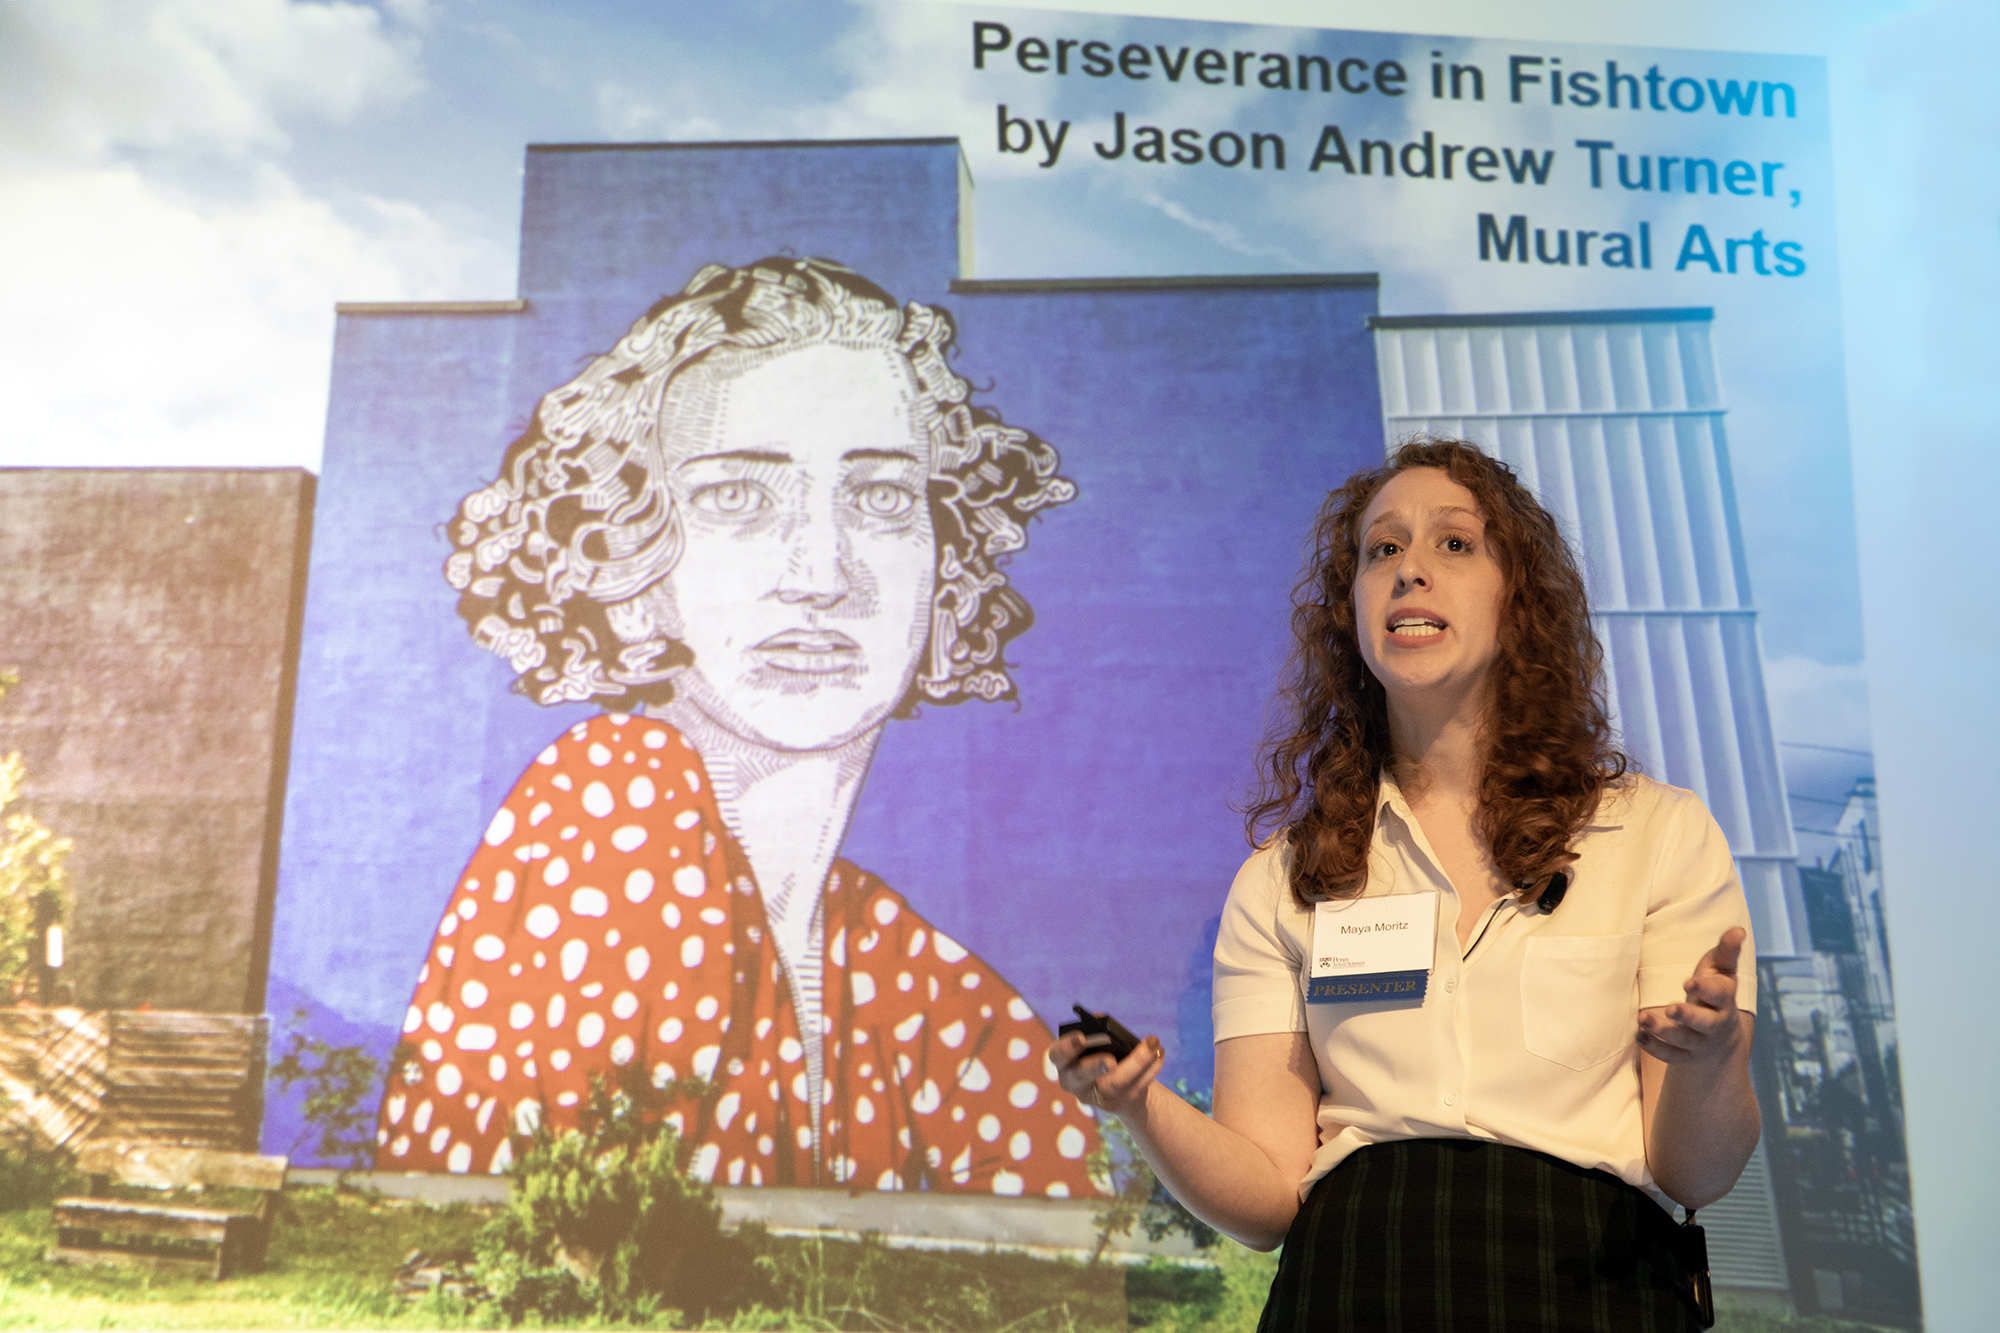 Maya Moritz giving a lecture in front of a mural.